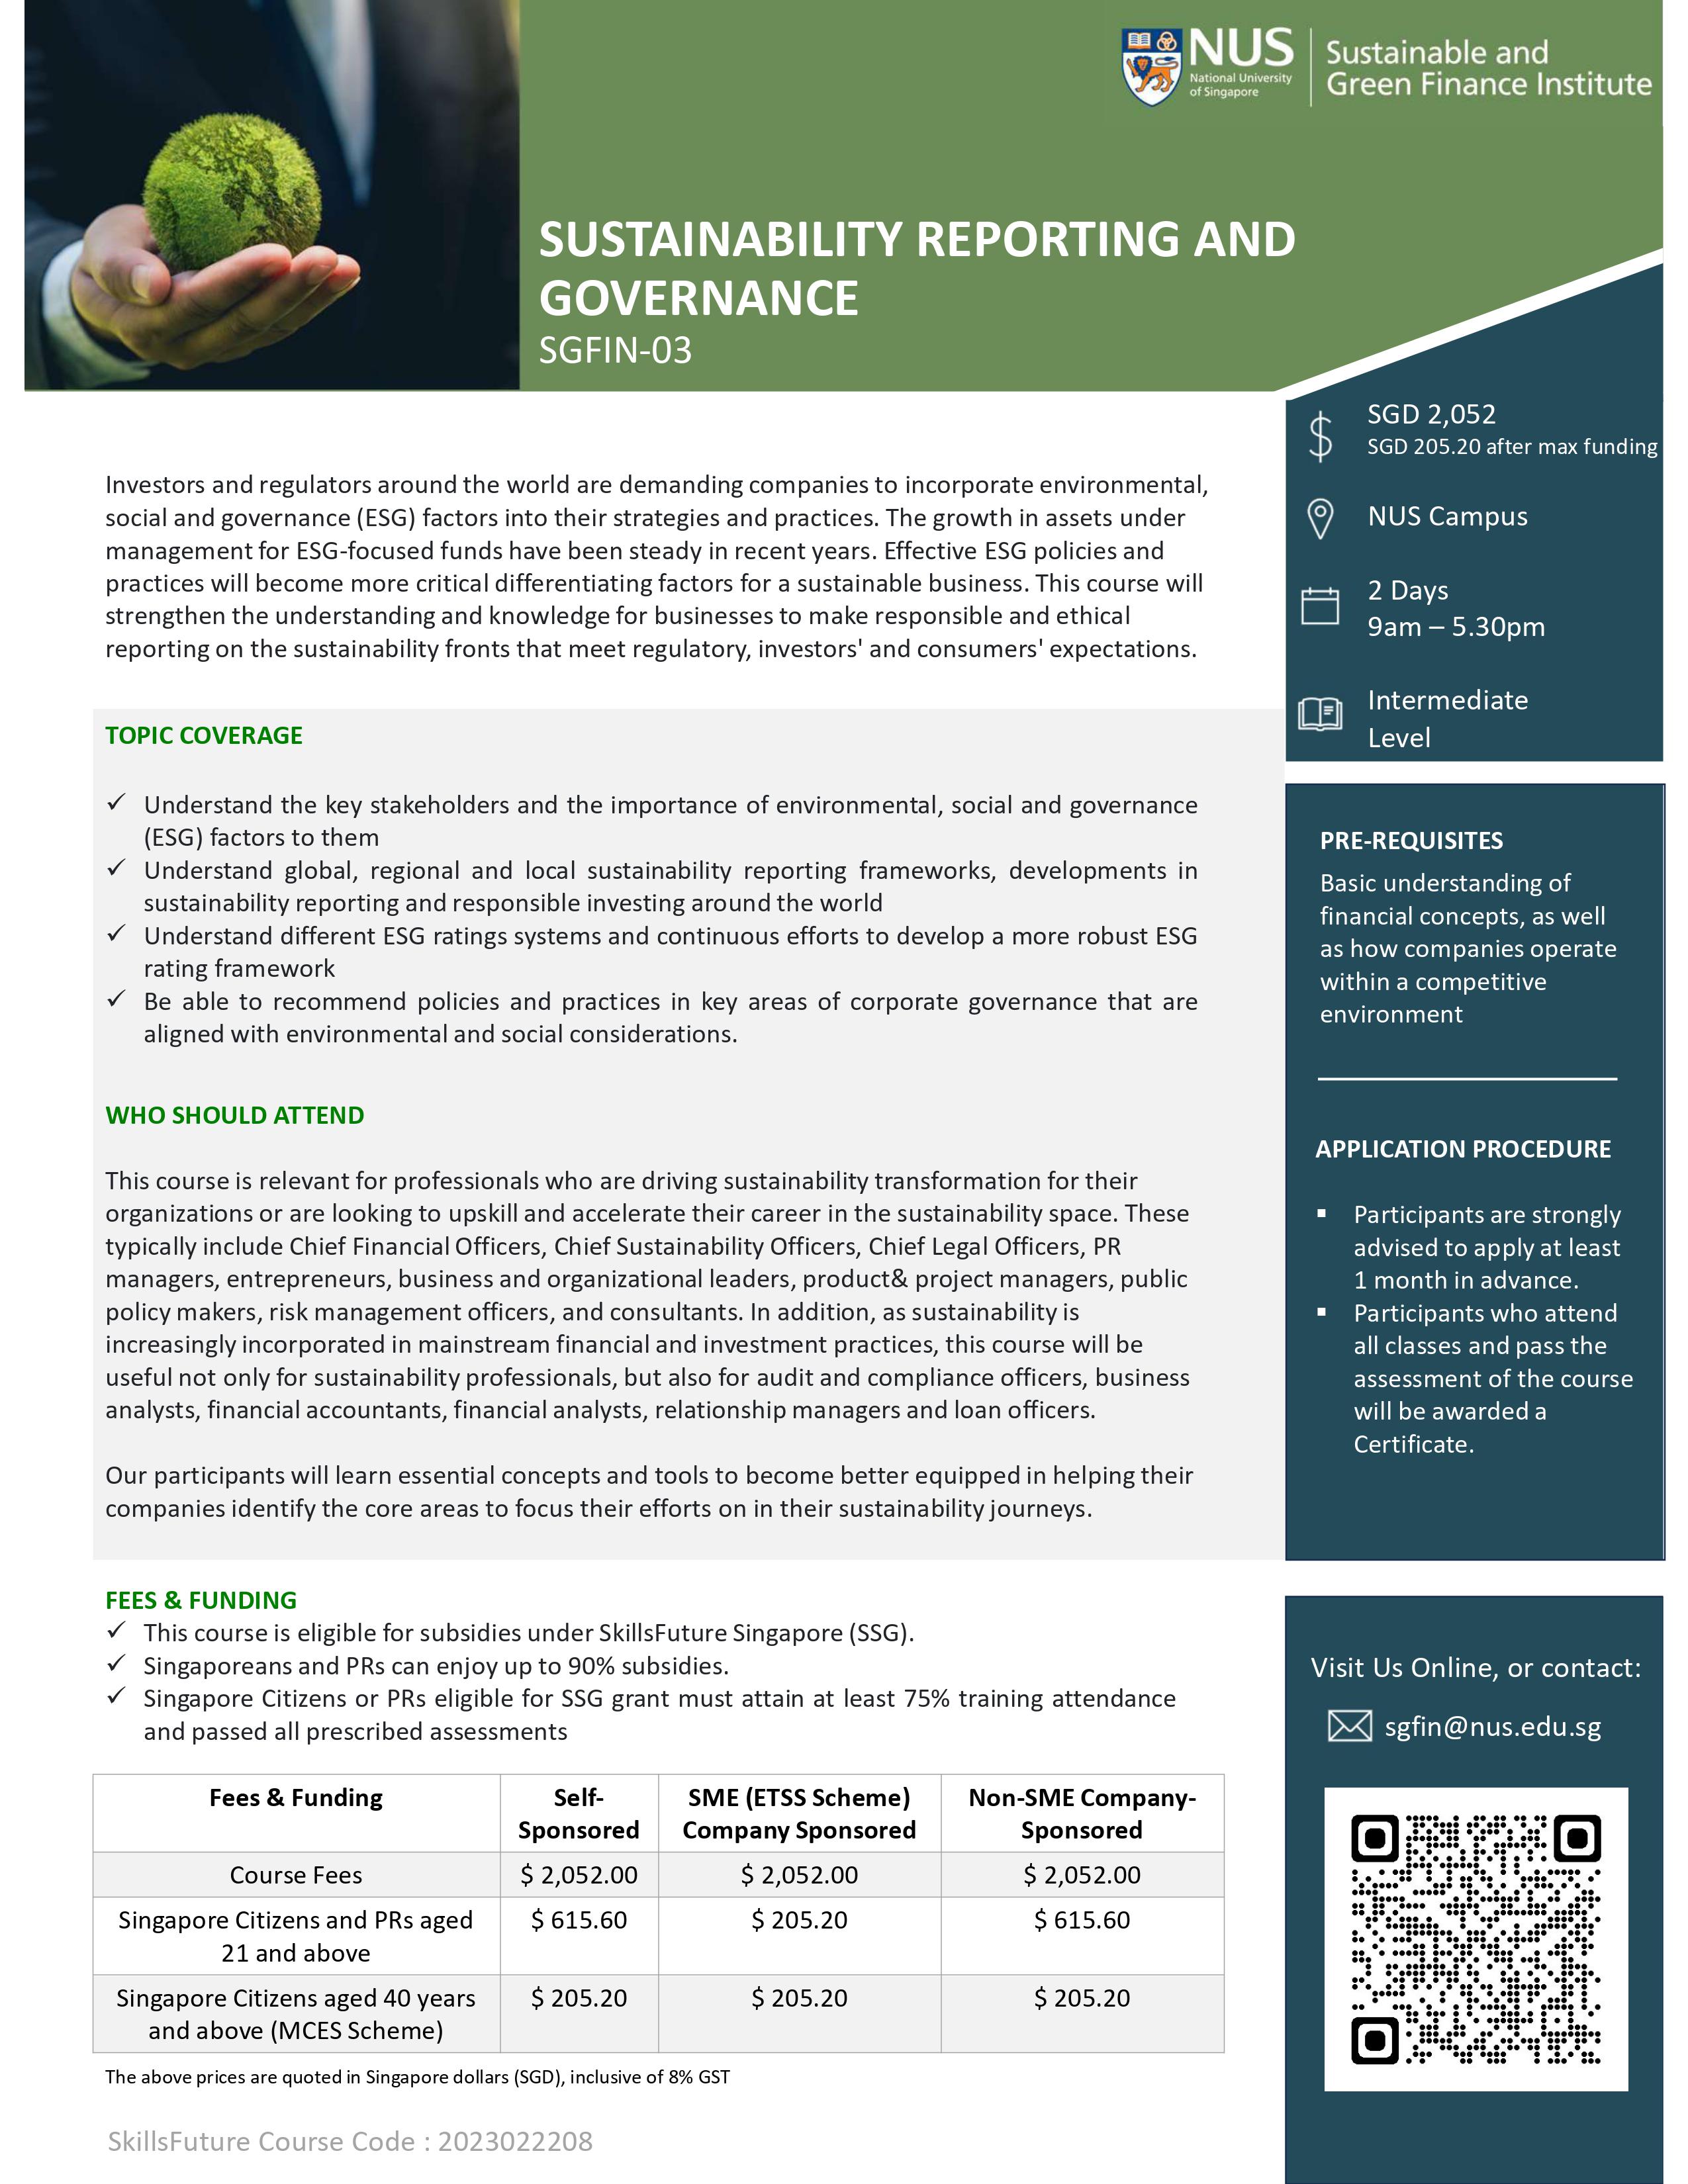 Sustainability Reporting and Governance Professional Programme Brochure v8